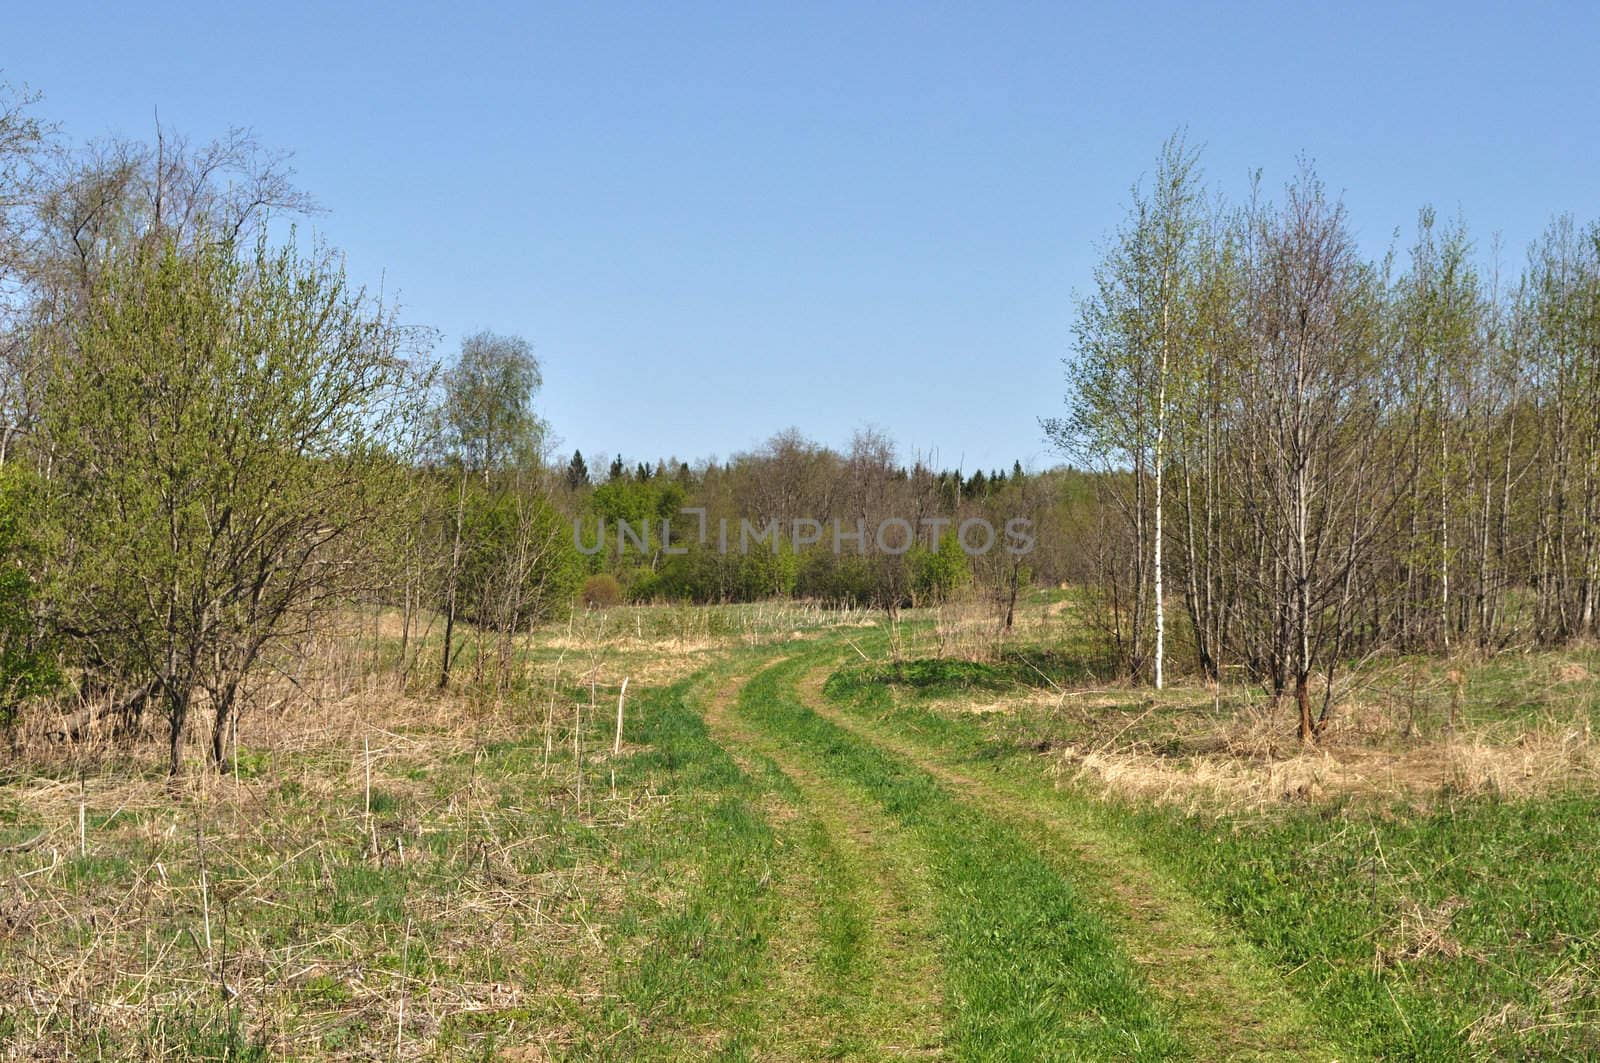 Country road in green grass between new trees, spring day